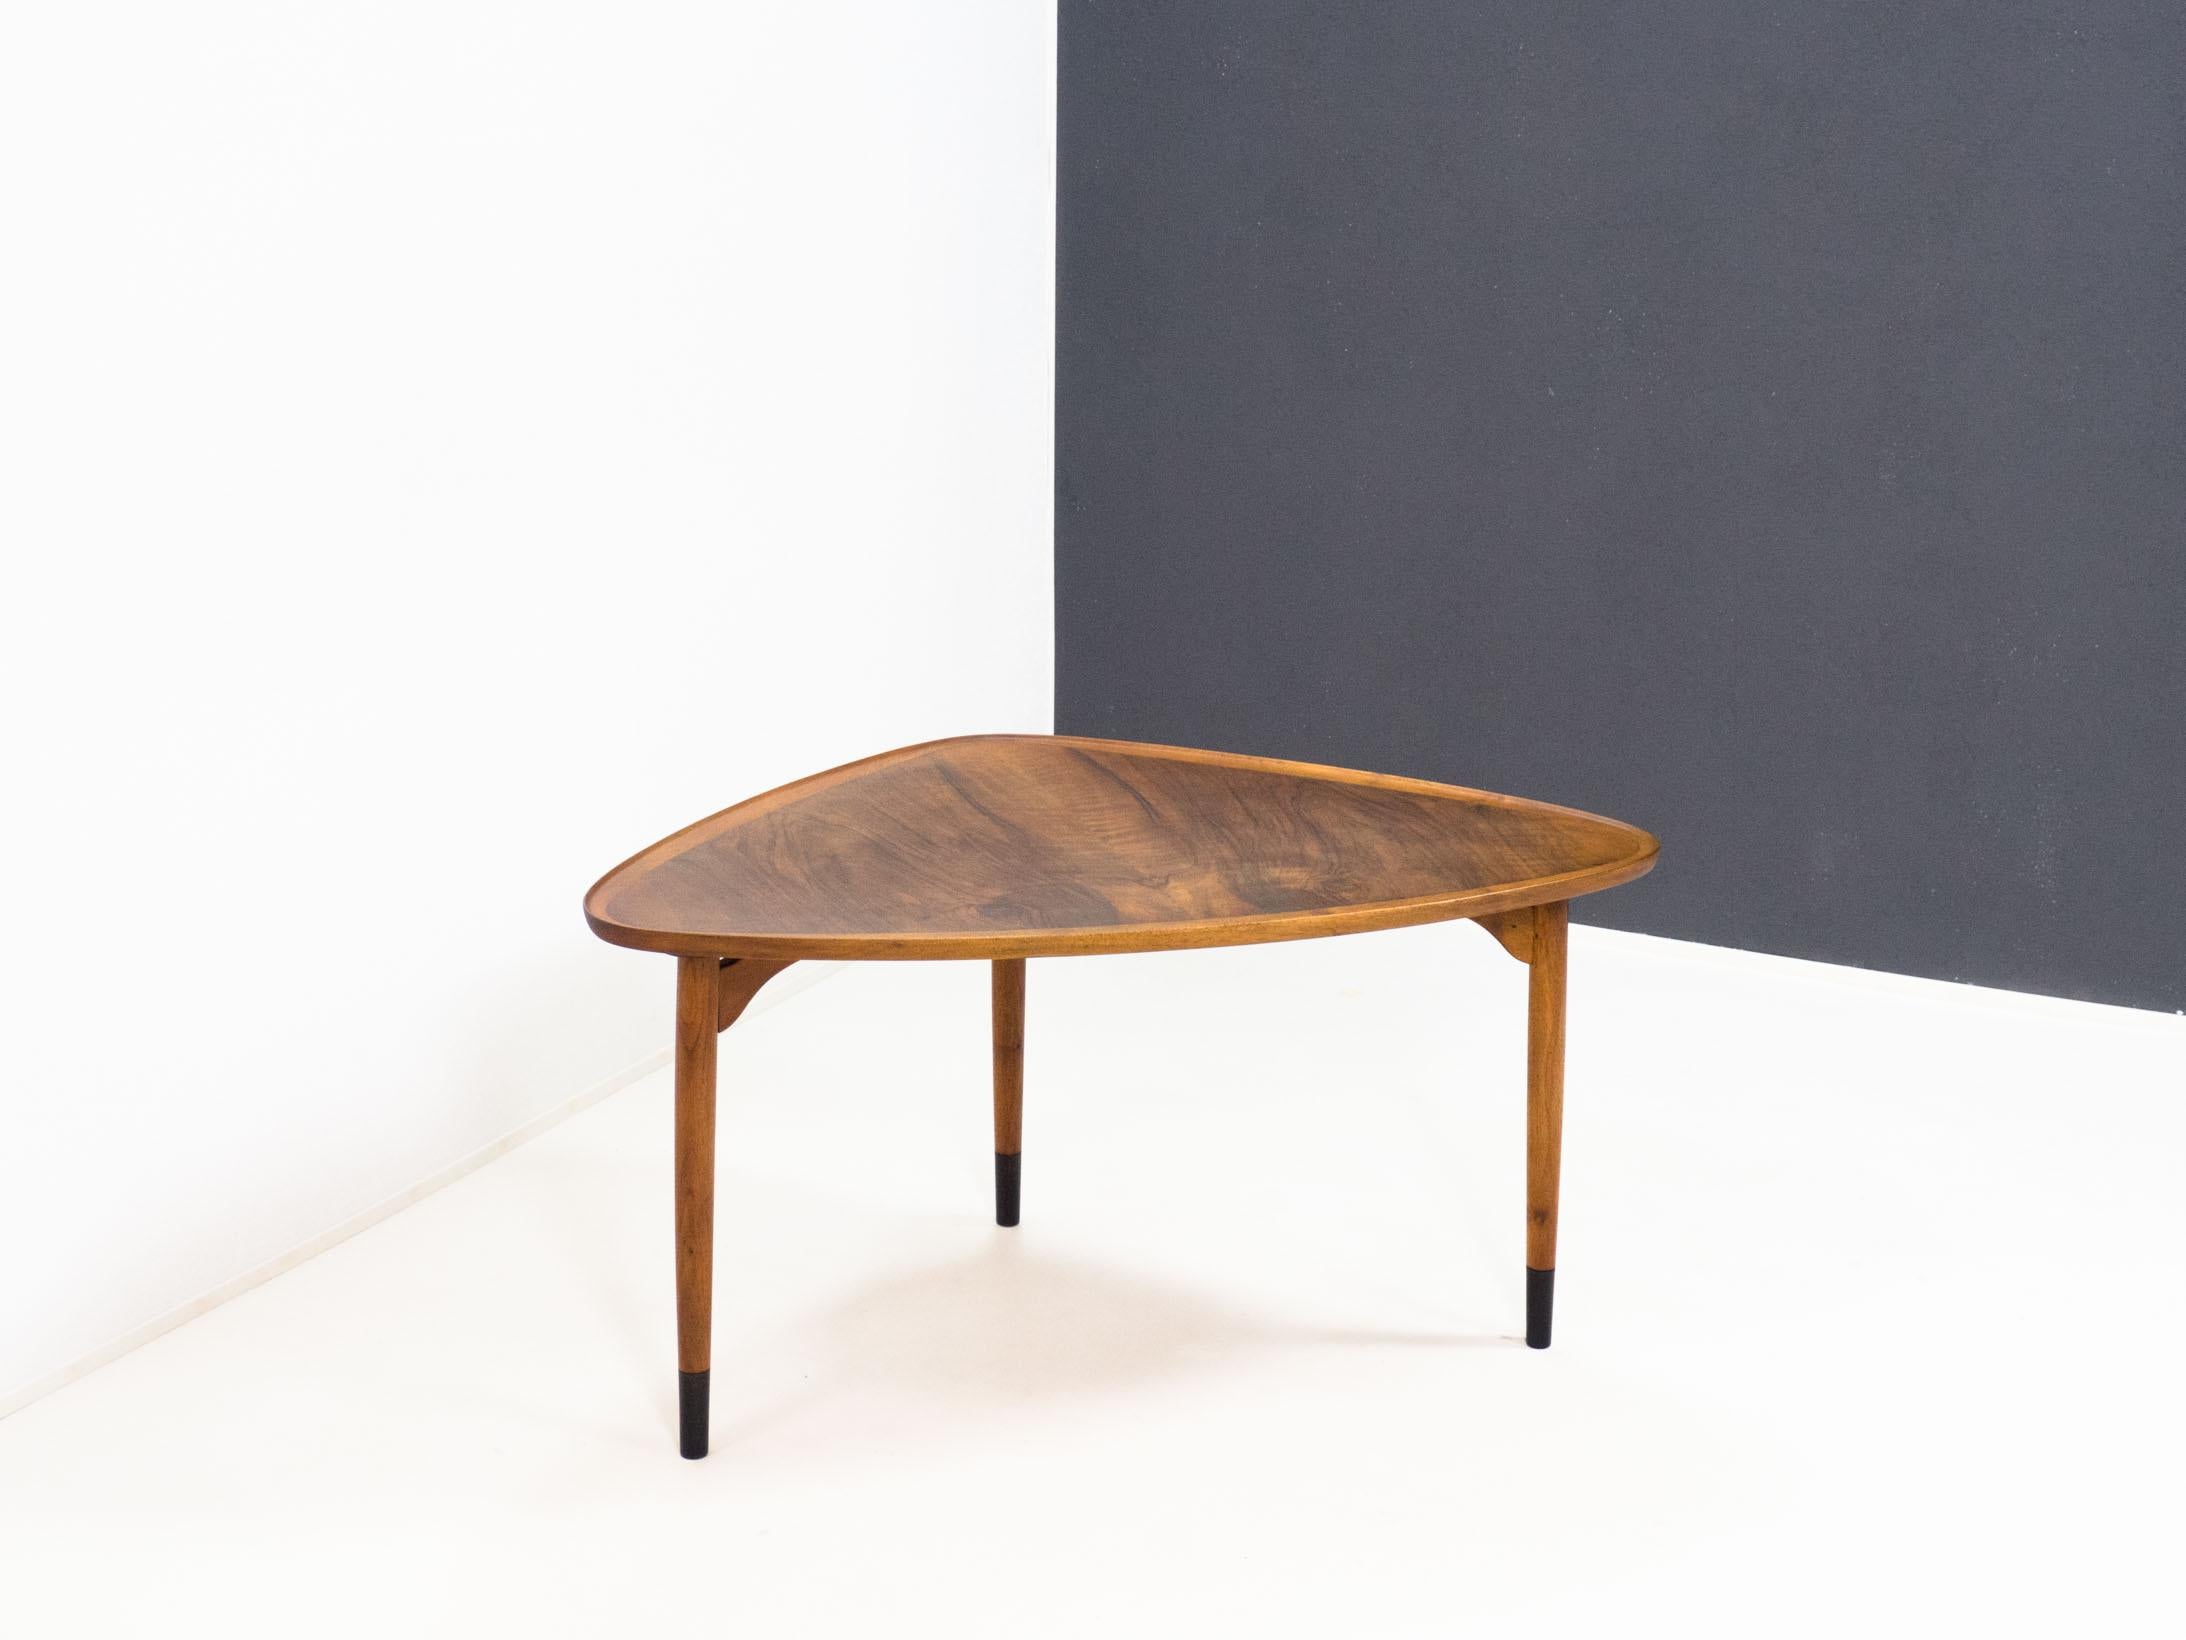 Danish design triangular coffee table from Denmark, 1950s.

This table is veneered in mirrored walnut on the top and has solid walnut edges and legs.

We have unfortunately been unable to find a maker or designer for this table, despite of its